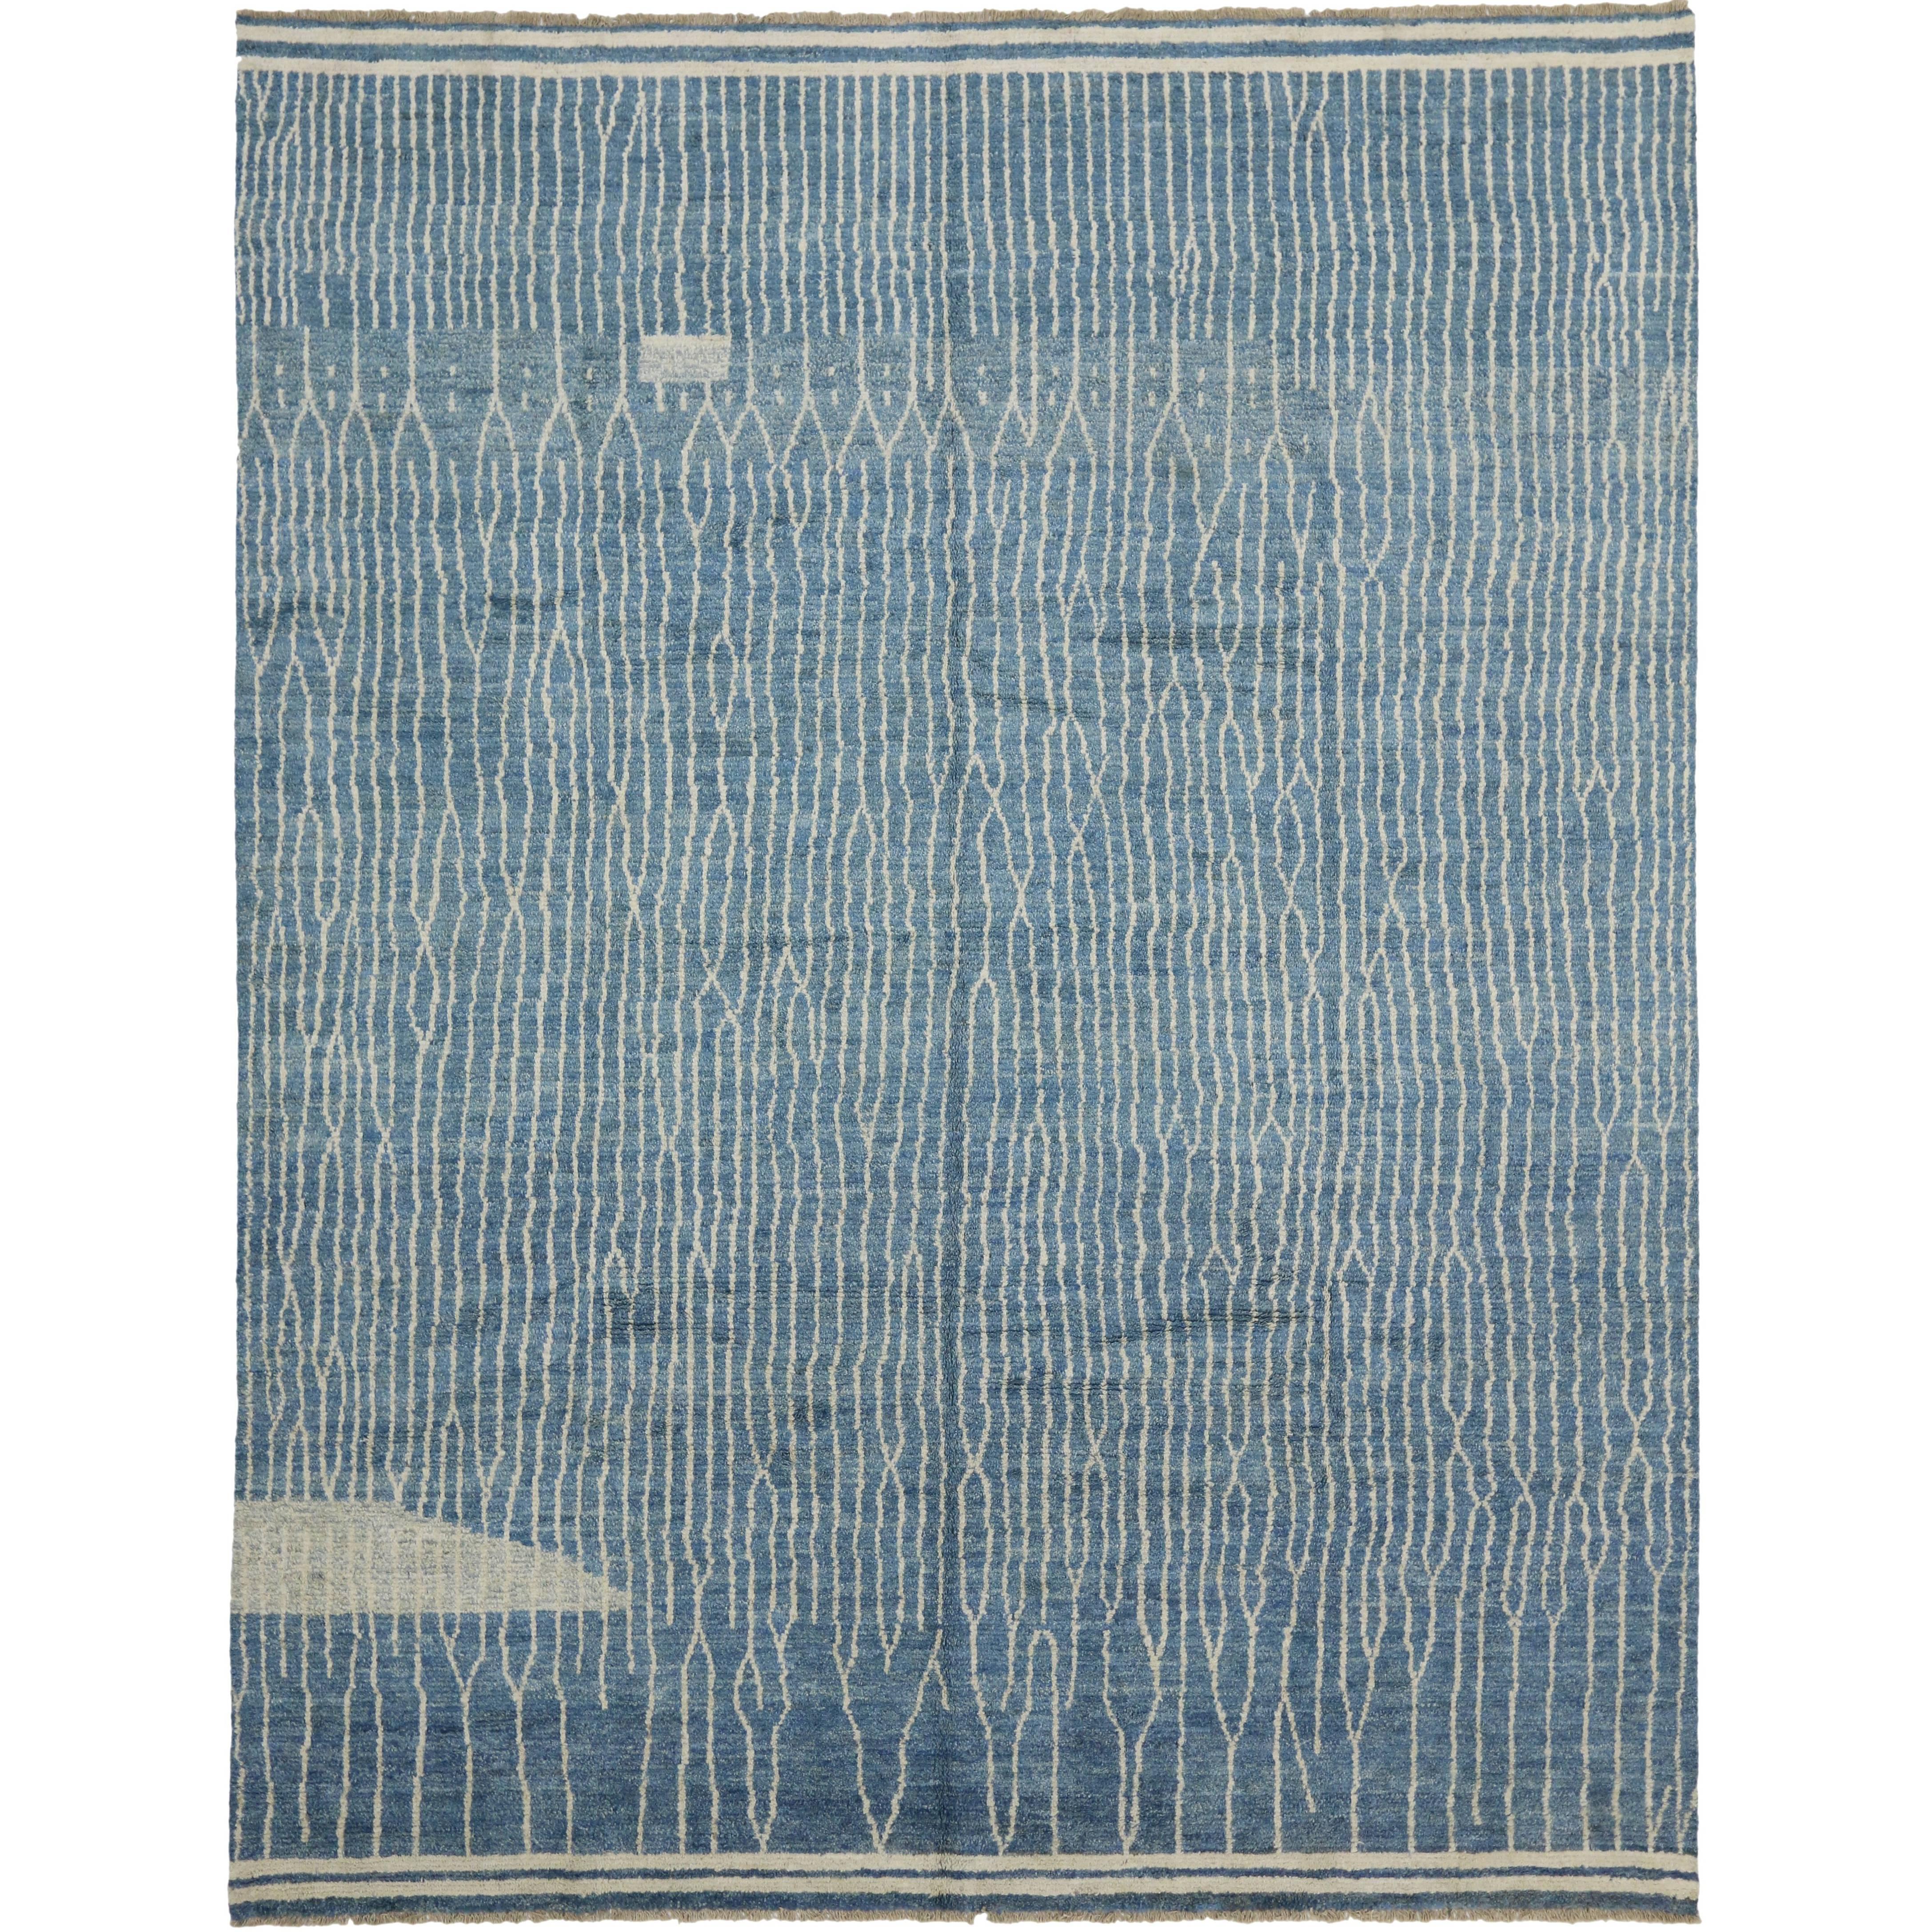 Light Blue and Greige Contemporary Moroccan Style Rug with Abstract Design